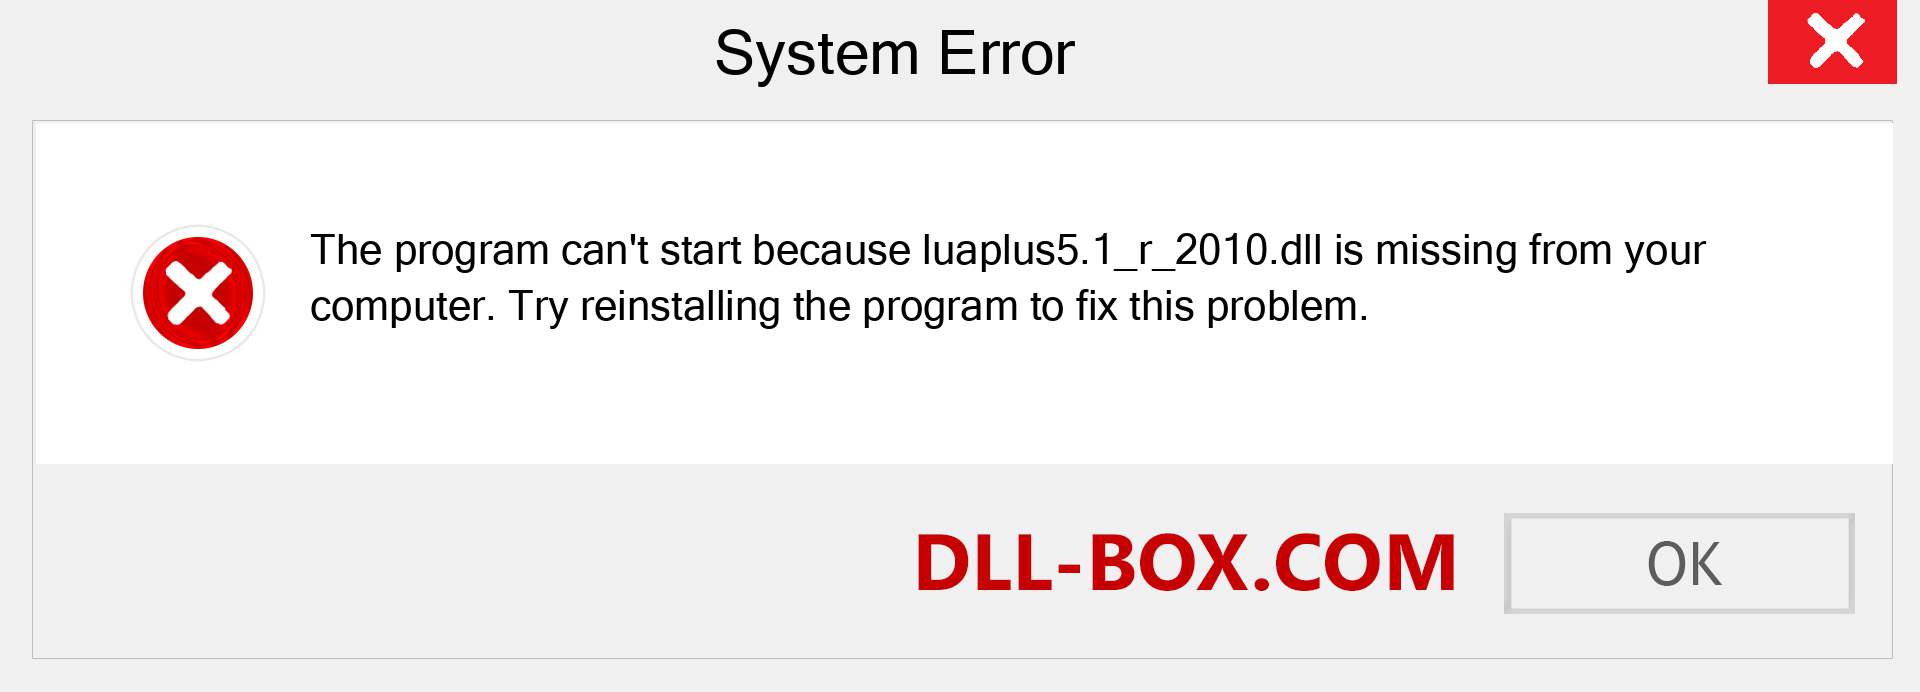  luaplus5.1_r_2010.dll file is missing?. Download for Windows 7, 8, 10 - Fix  luaplus5.1_r_2010 dll Missing Error on Windows, photos, images